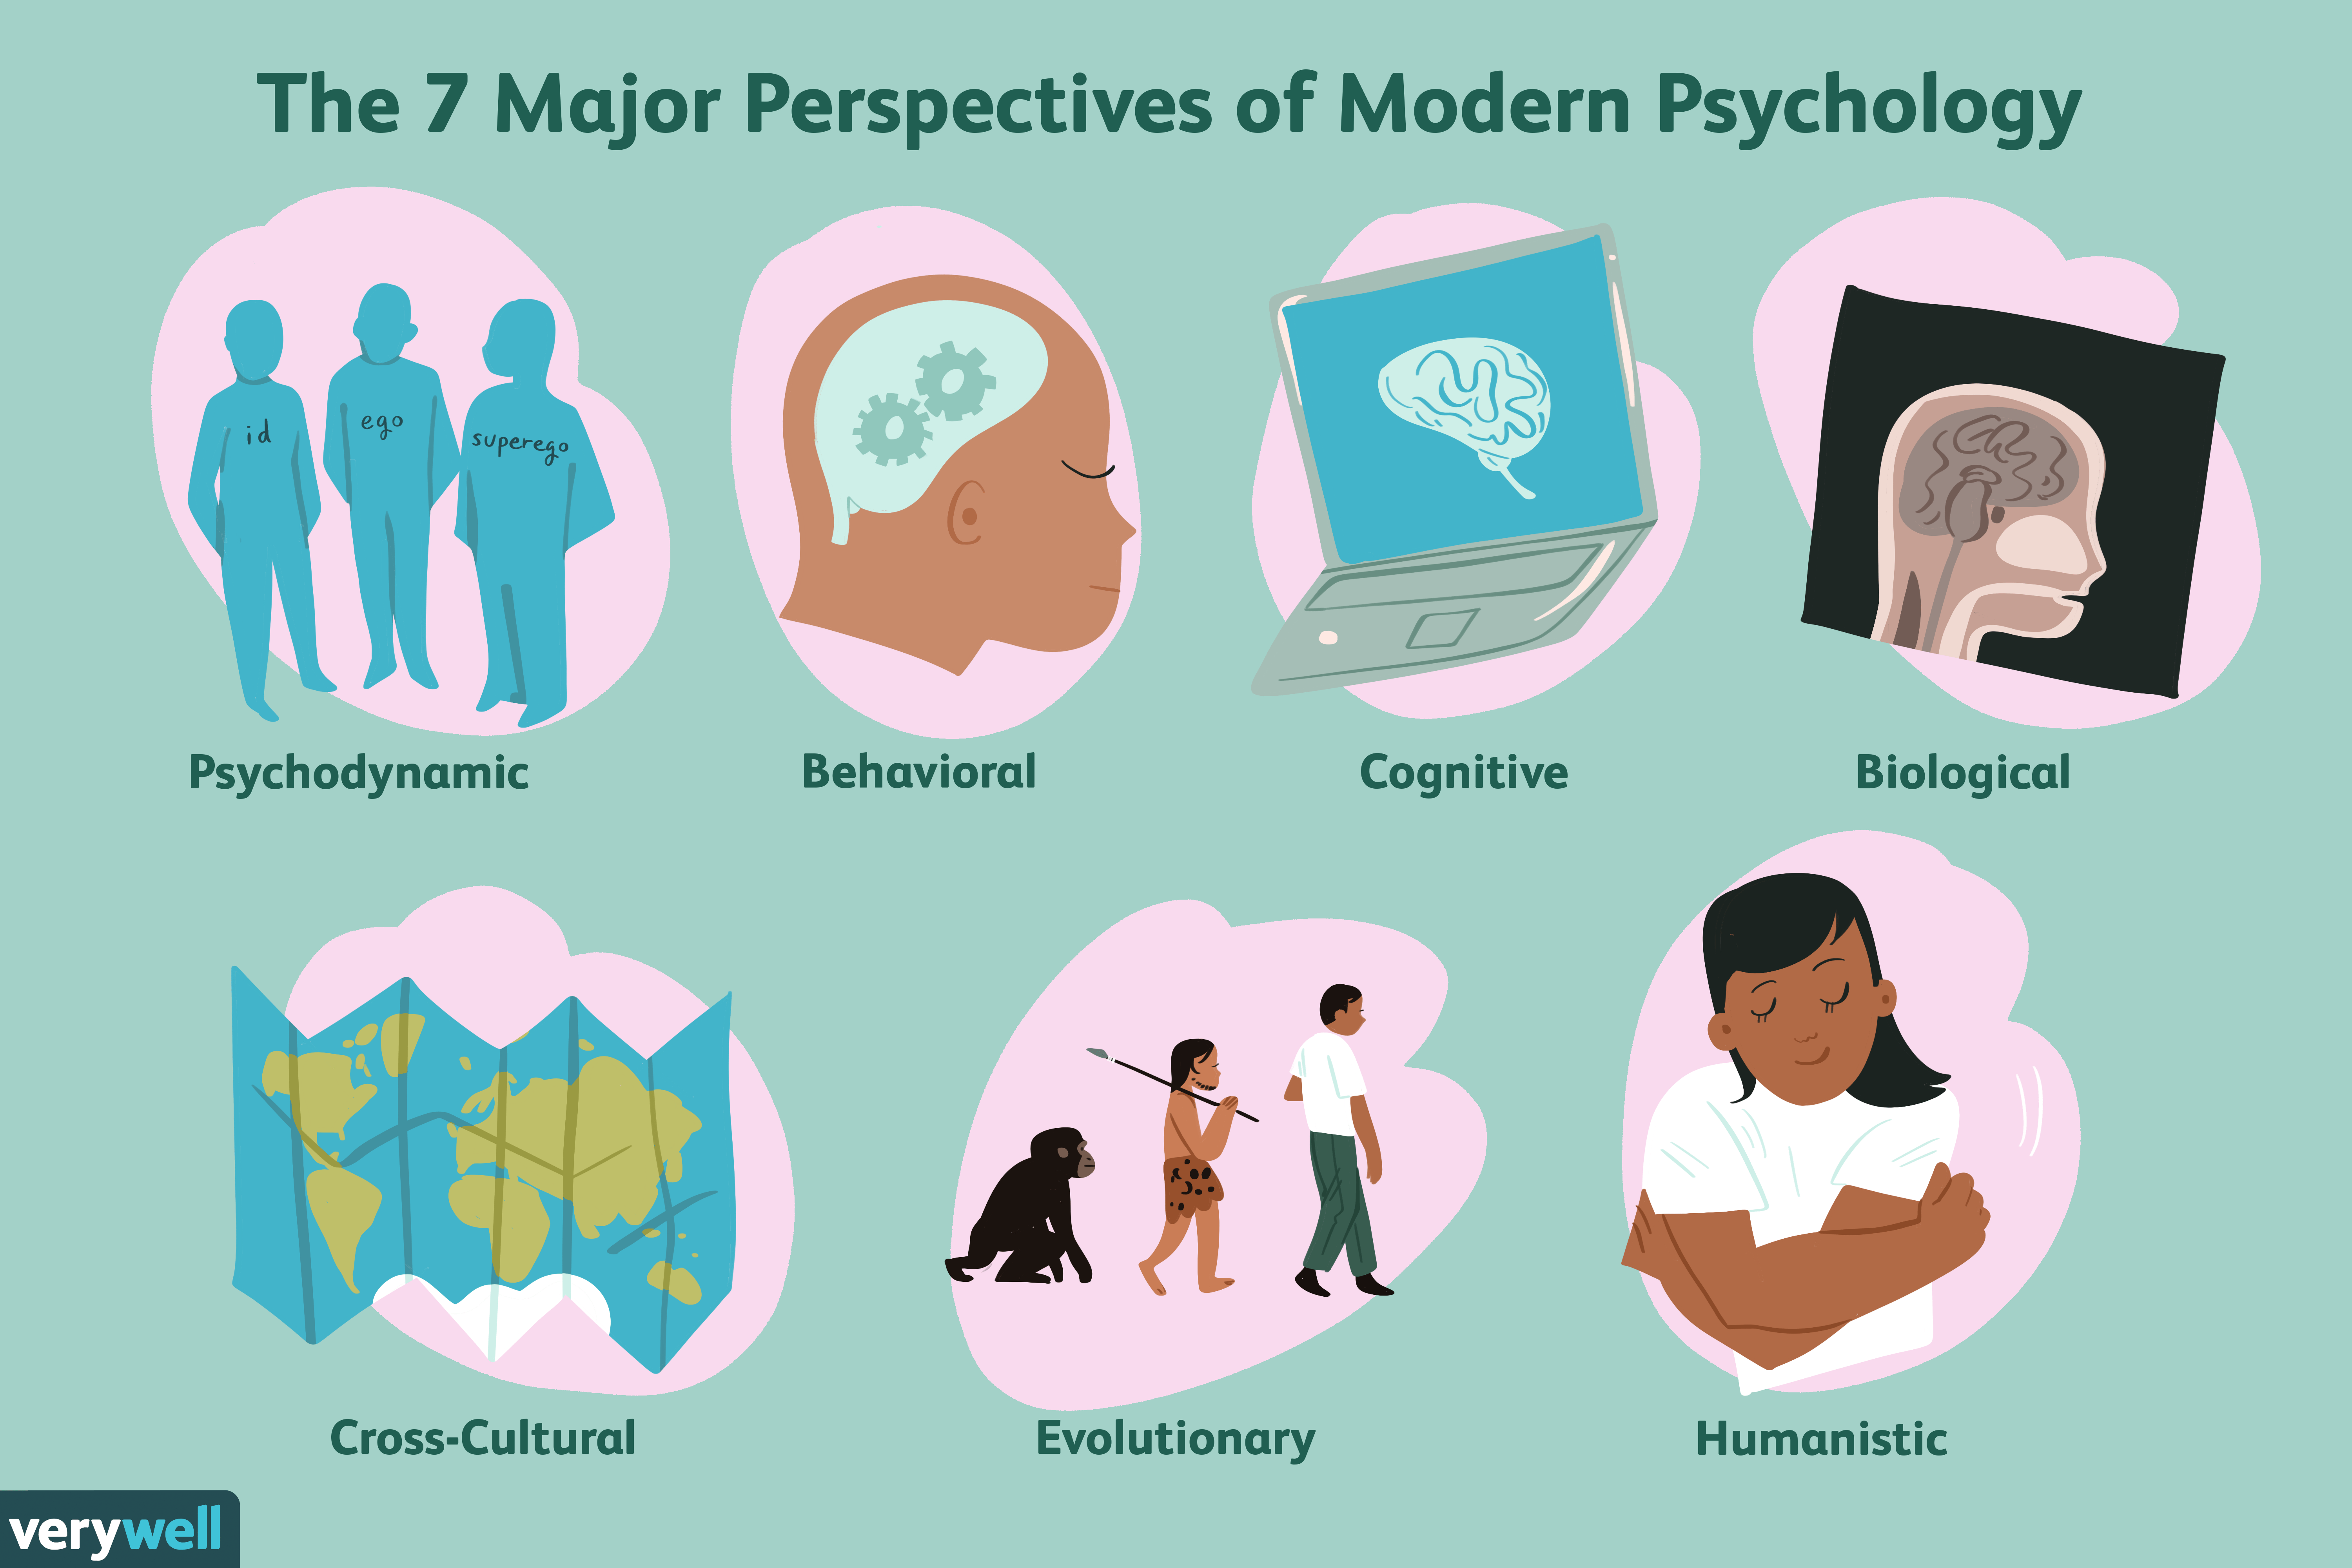  The image shows the 7 major perspectives of modern psychology: psychodynamic, behavioral, cognitive, biological, cross-cultural, evolutionary, and humanistic.